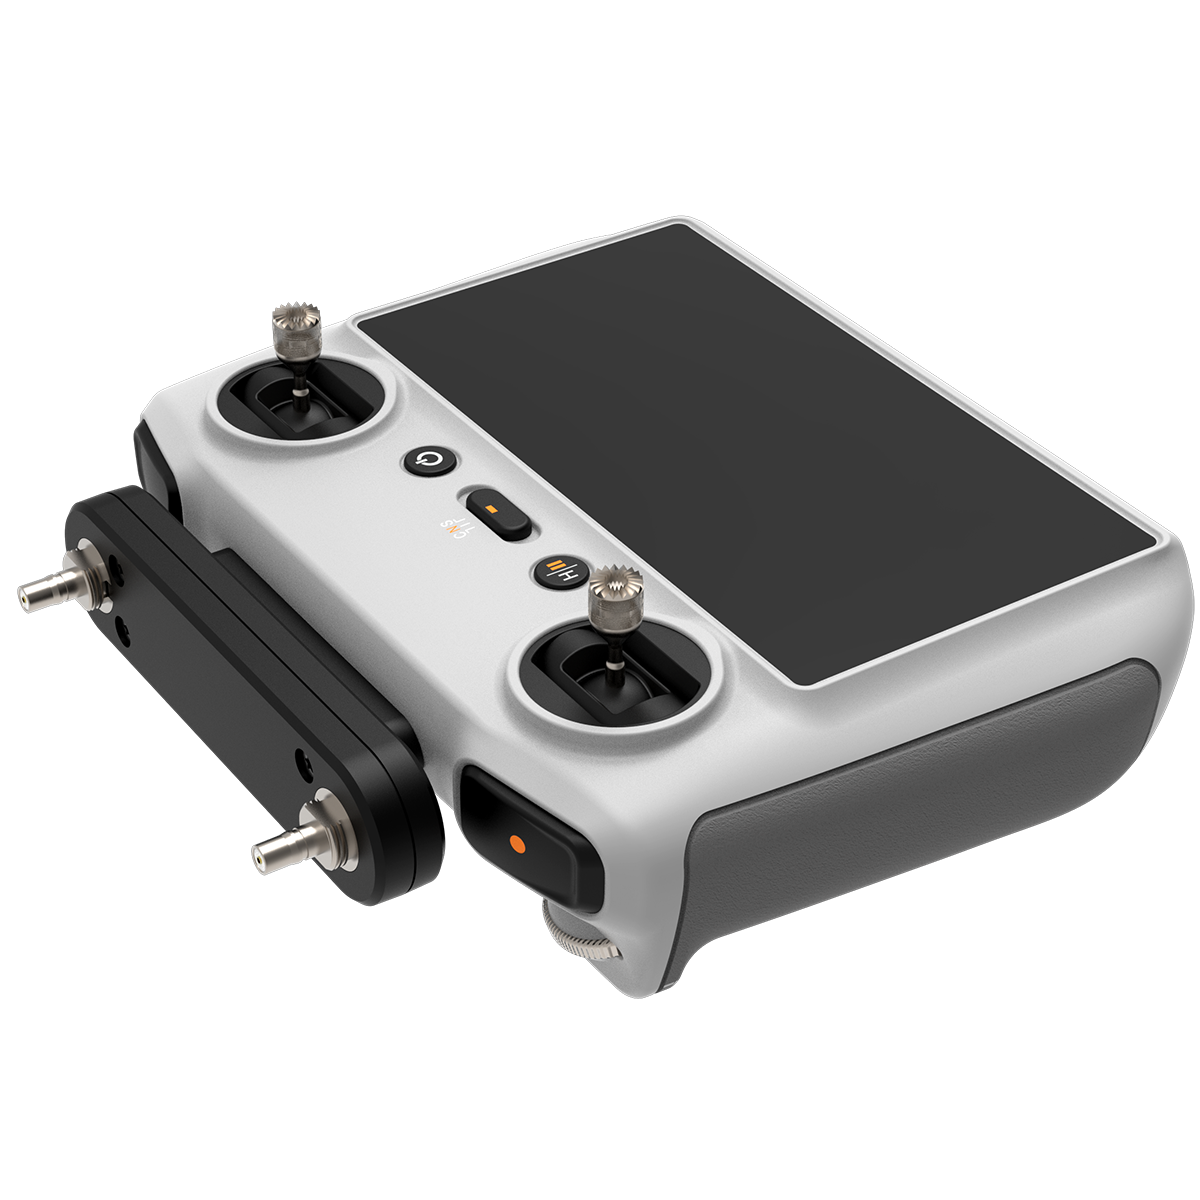 The controller of the modified DJI RC for DJI mini 3 / pro can be equipped  with an external ALIENTECH antenna